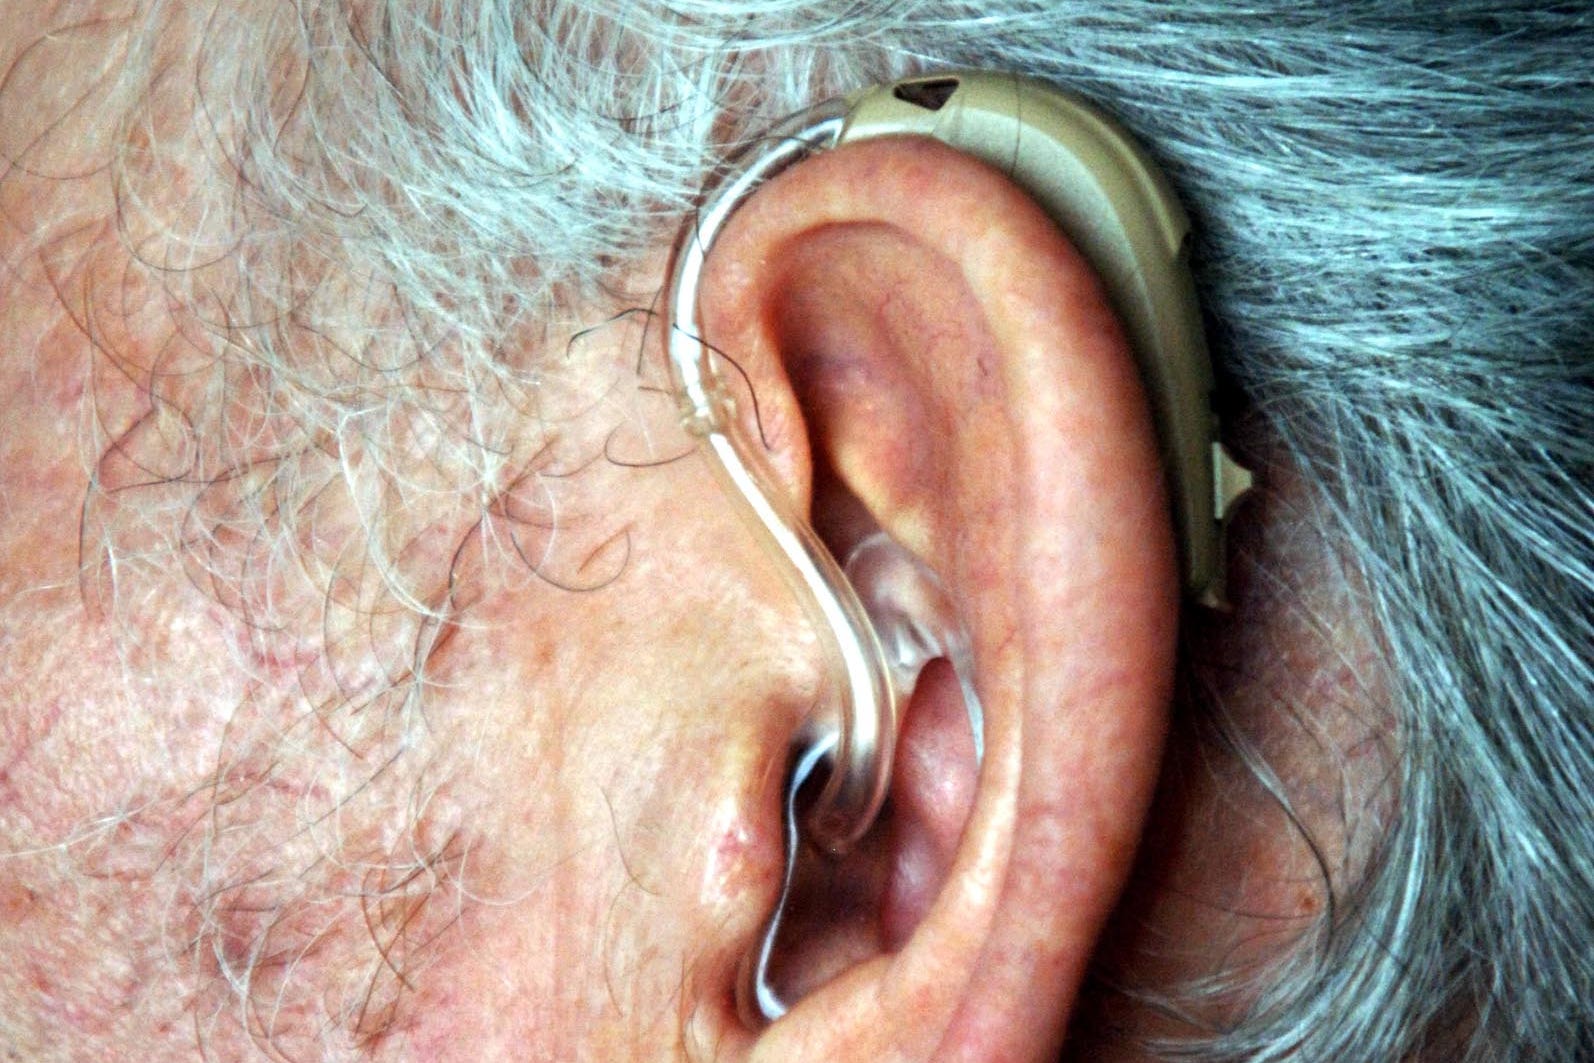 A Danish study suggests people with hearing loss who do not use hearing aids could have a higher risk of developing dementia (PA)